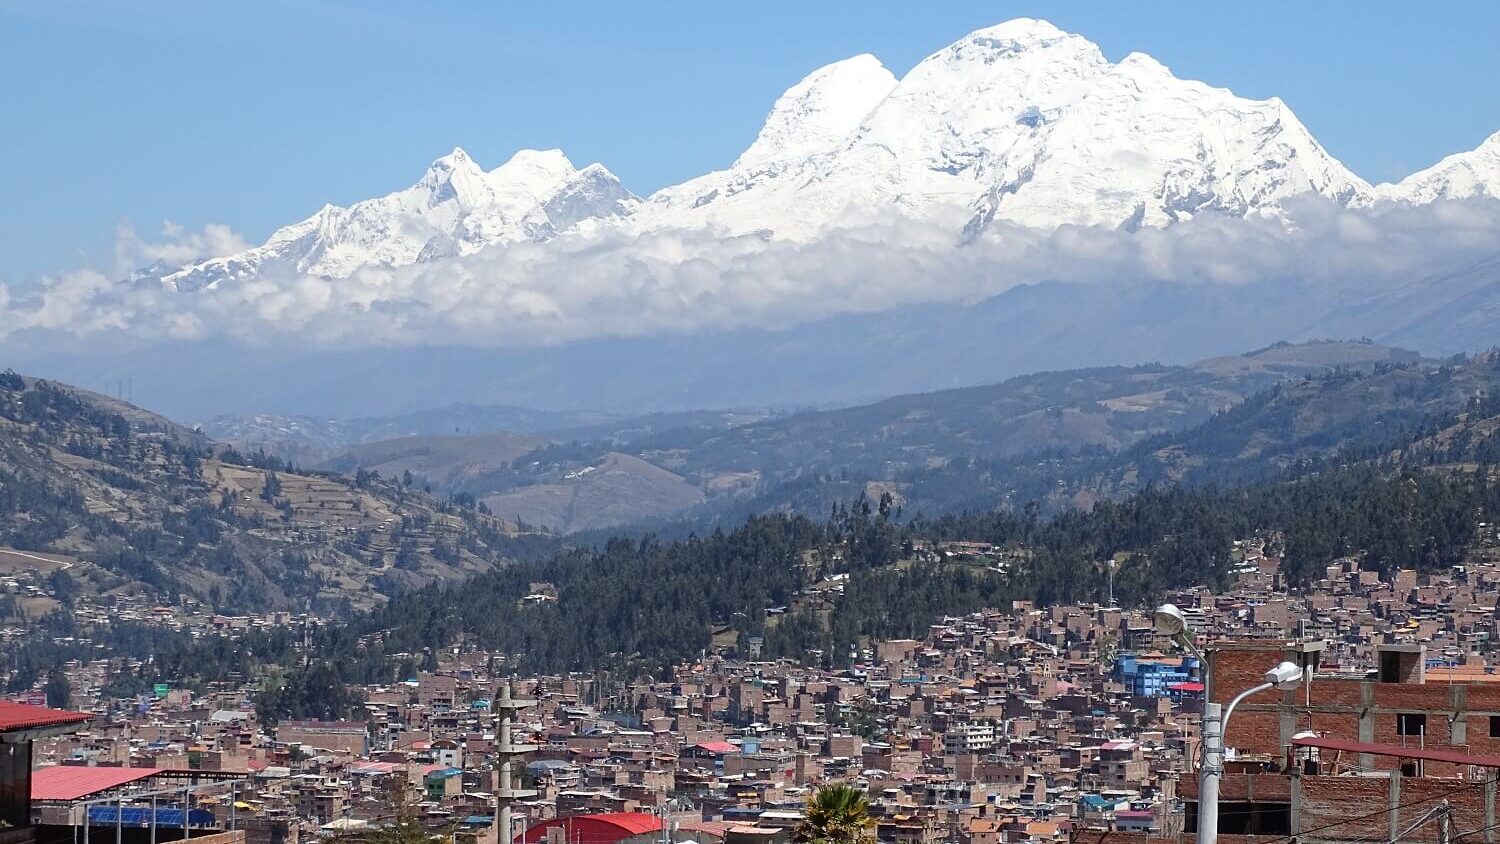 The city of Huaraz with its ever-impressive backdrop of the Cordillera Blanca mountain range. The Huascarán is the highest mountain of Peru. Visit this region with RESPONSible Travel Peru!